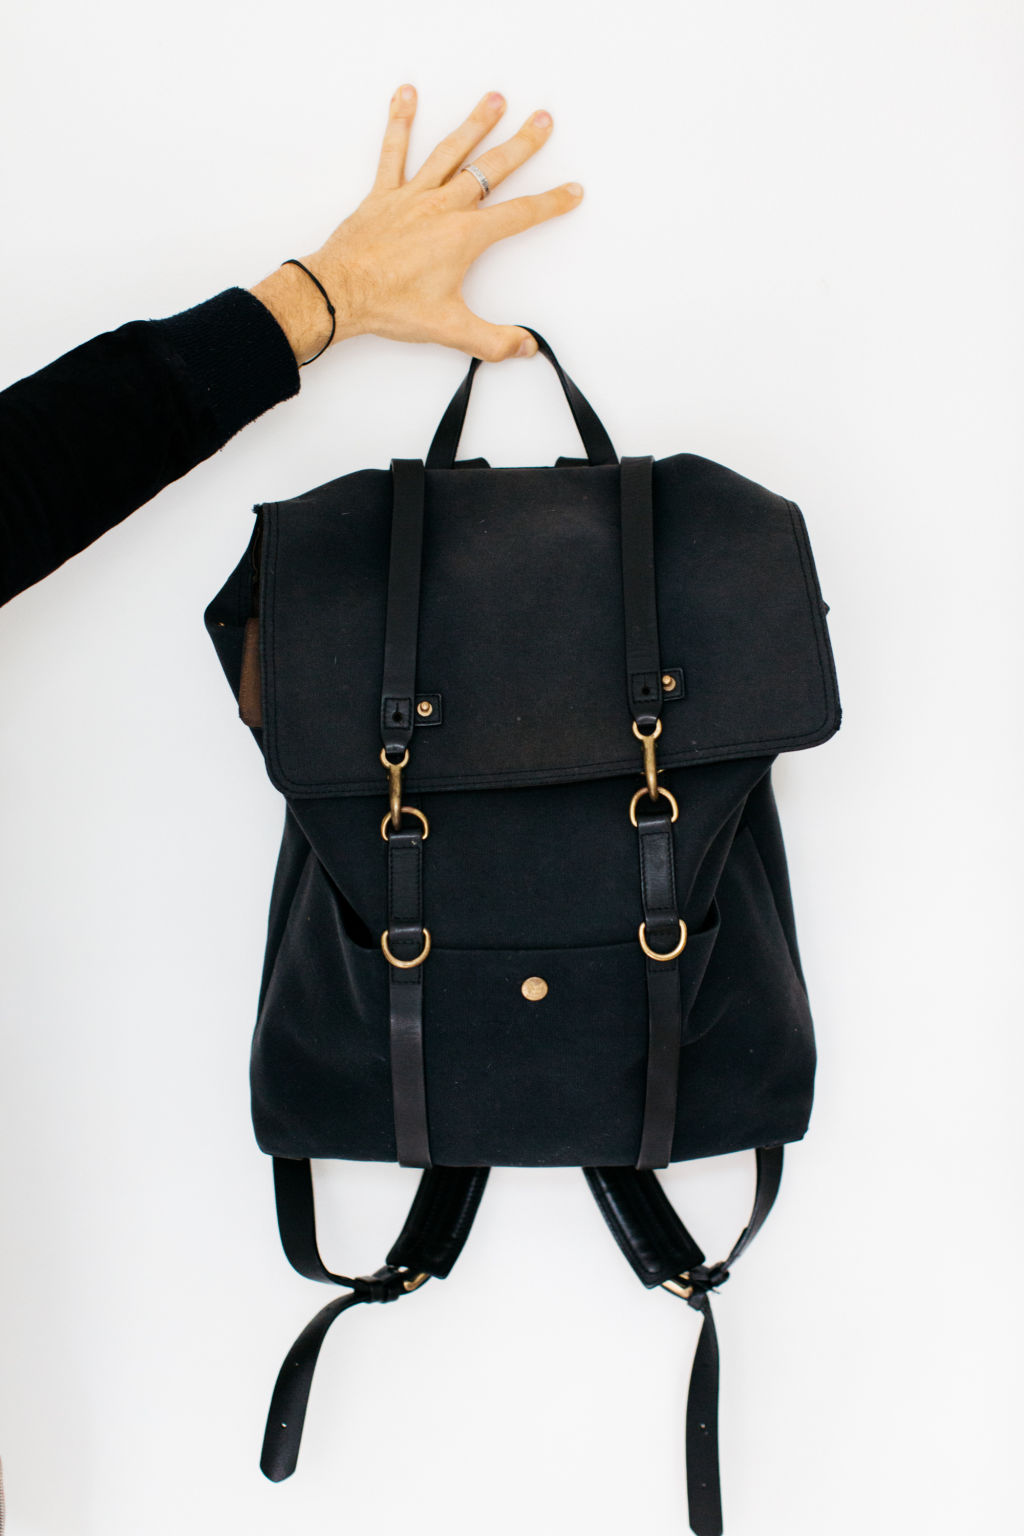 'I would cycle into work and I wanted a stylish backpack to take with me.' Photo: Rachel Kara